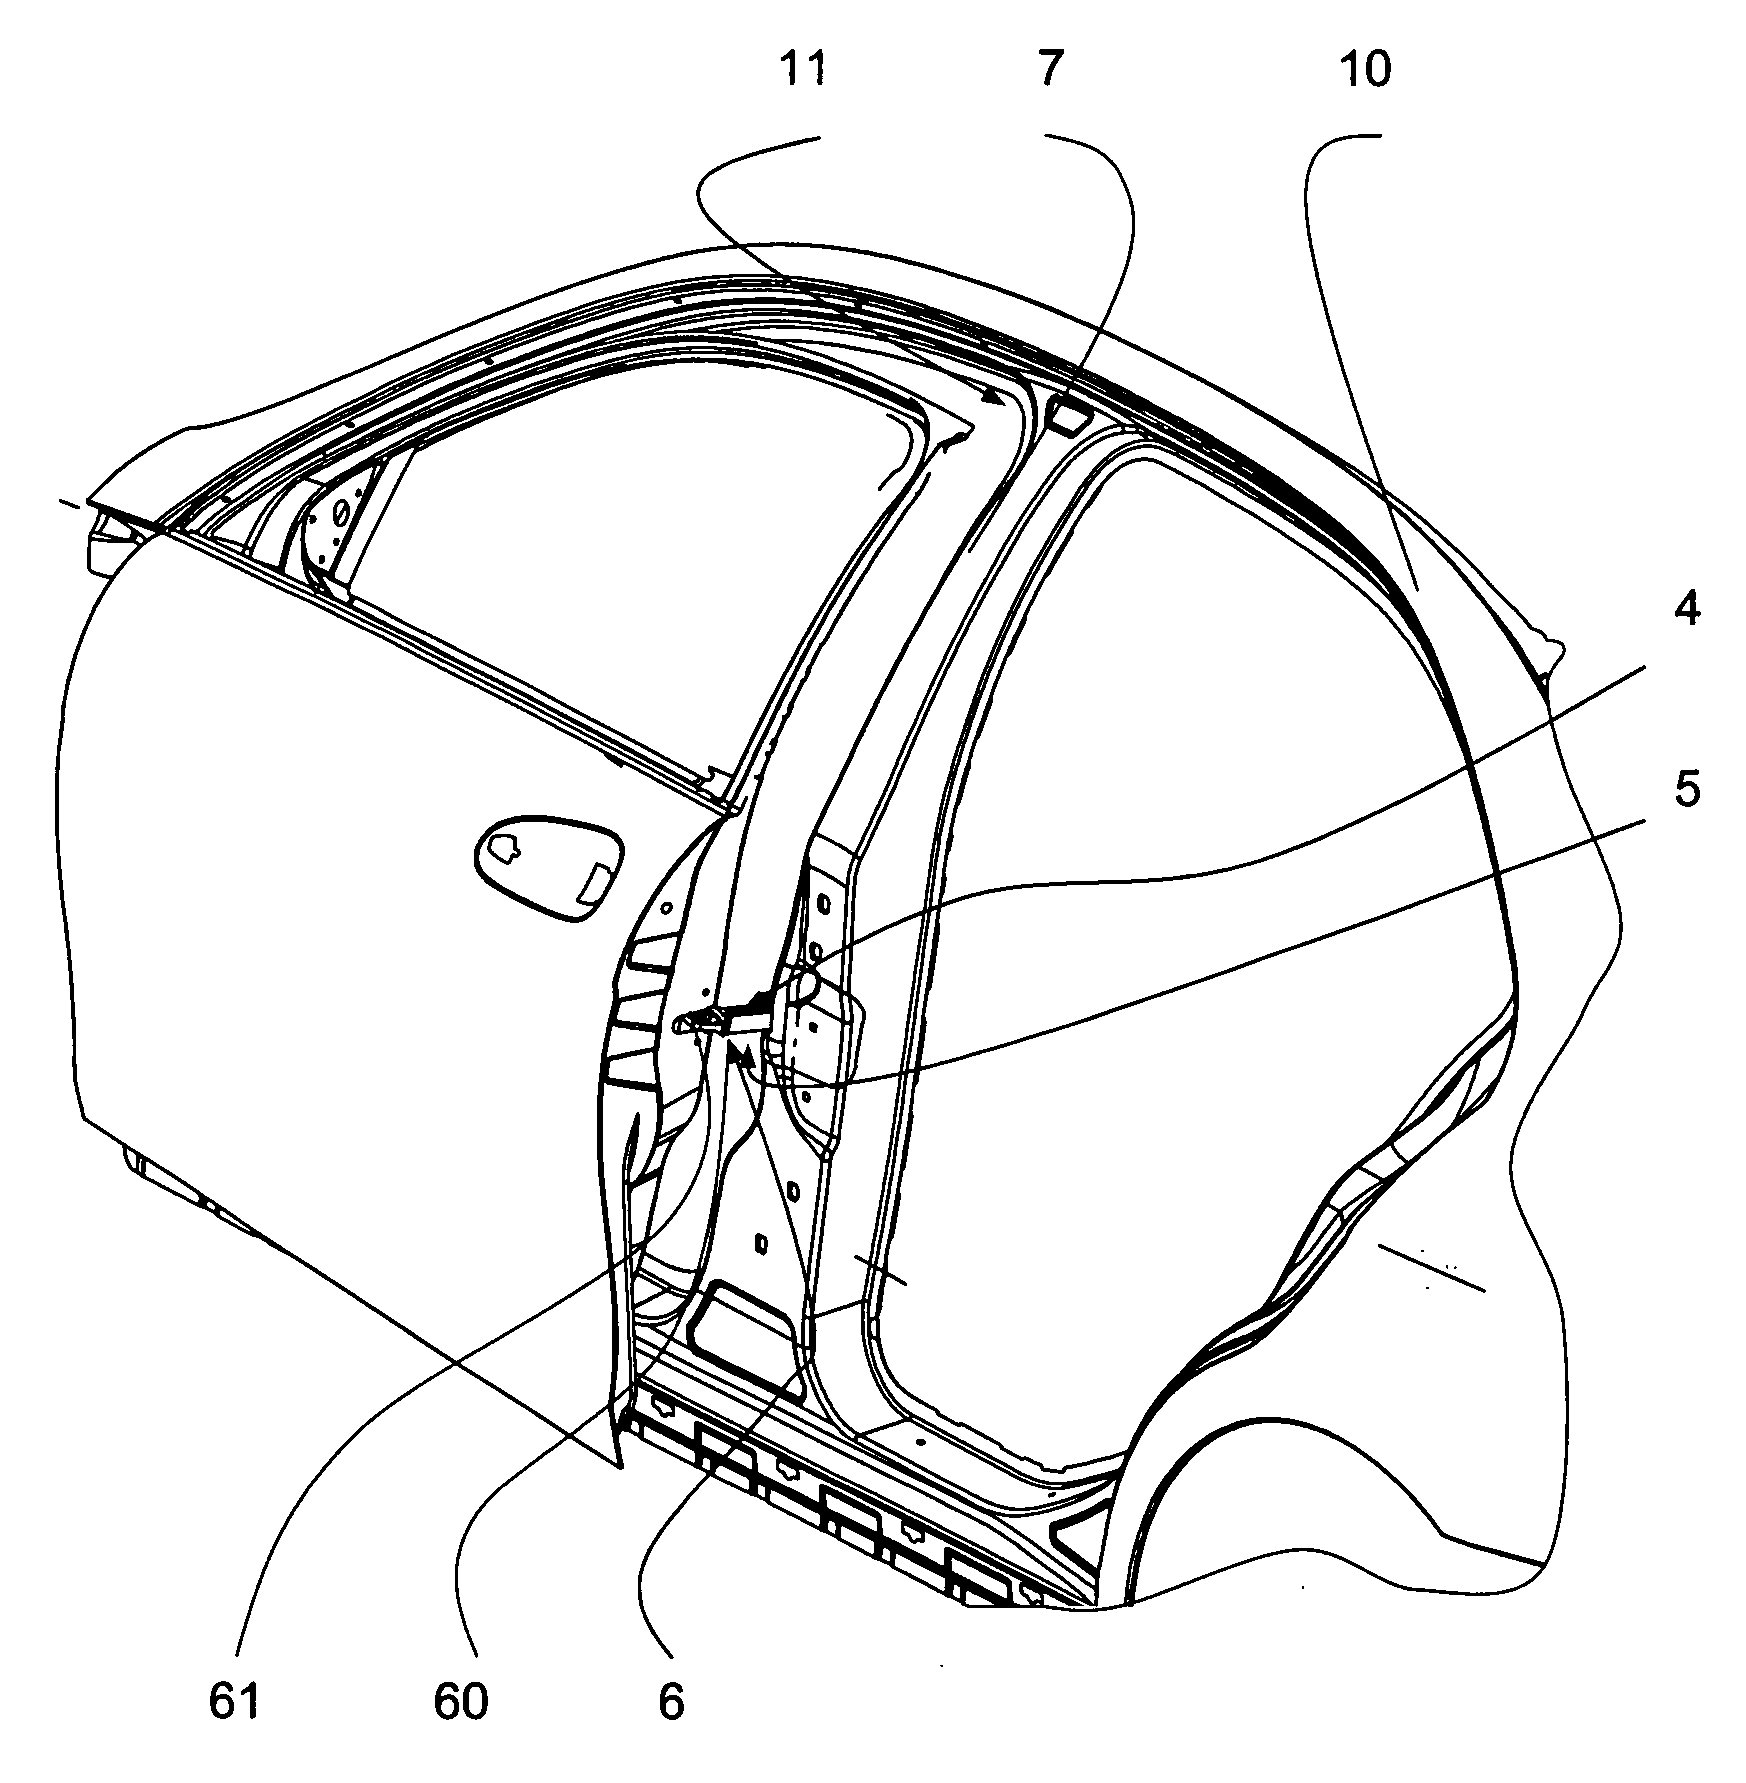 Device for side impact protection